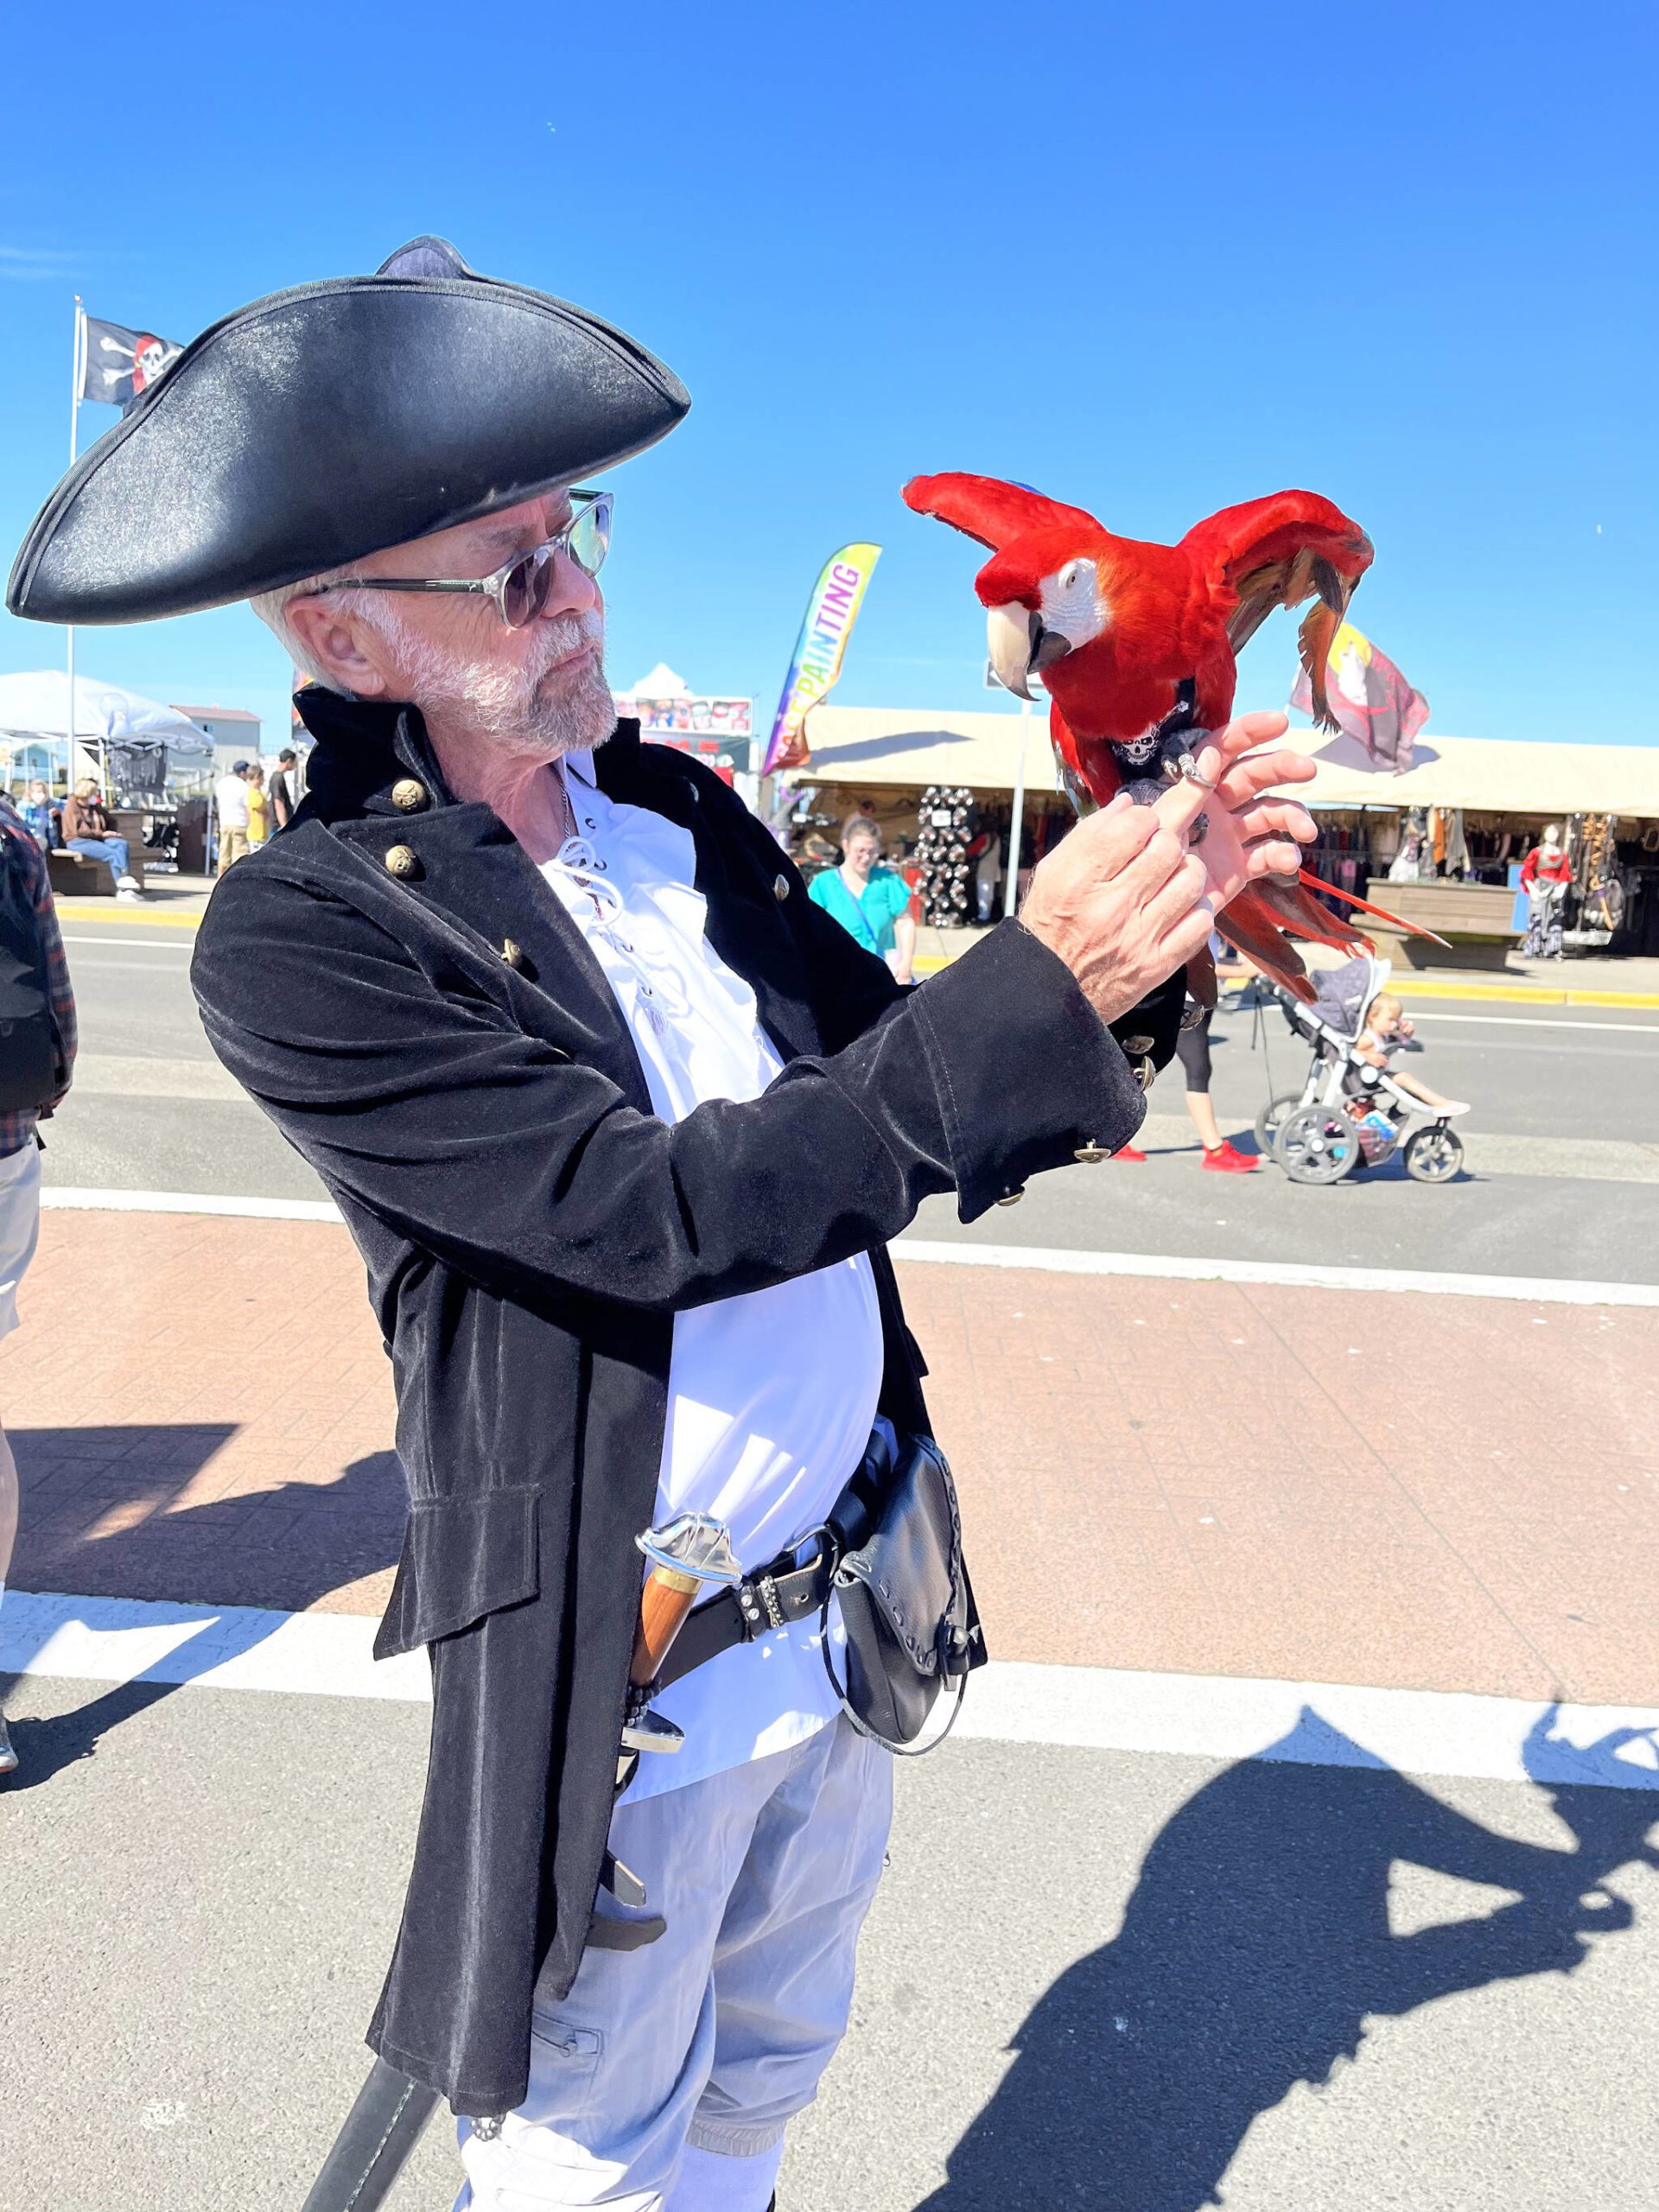 Matthew N. Wells | The Daily World Ron Schmidt, and his 45-year old macaw named Jazz, were a sight to see on Friday, June 24, 2022, for fair attendees at the Rusty Scupper’s Pirate Daze festival in Westport. Schmidt was cheerfully showing off what she could do, and was insistent on those who wanted photos of the duo to take “selfies” with him. Schmidt was just happy to play like a “kid” again.